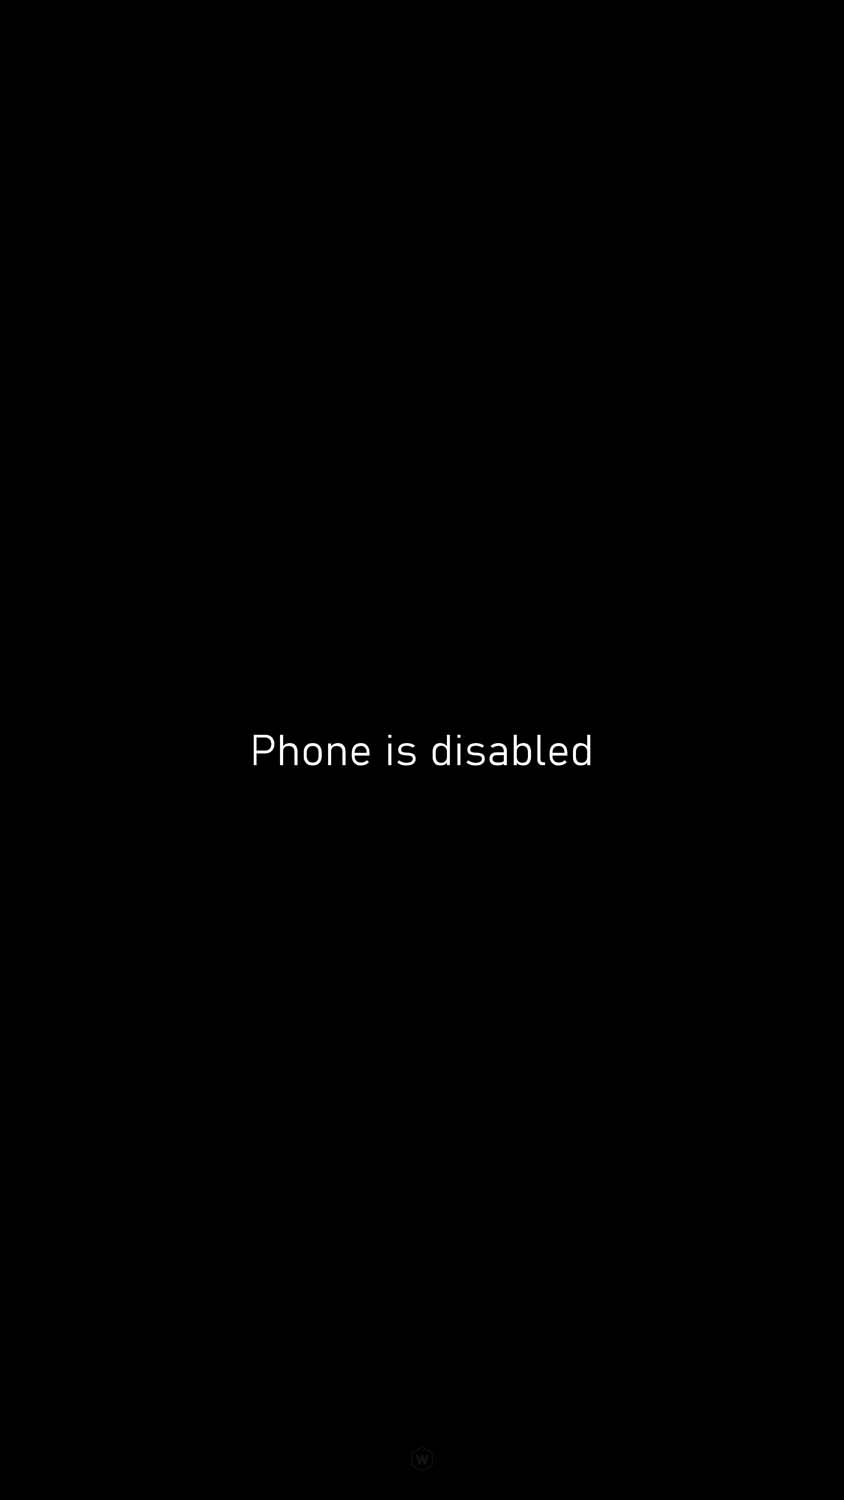 Phone Disabled iPhone Wallpaper HD